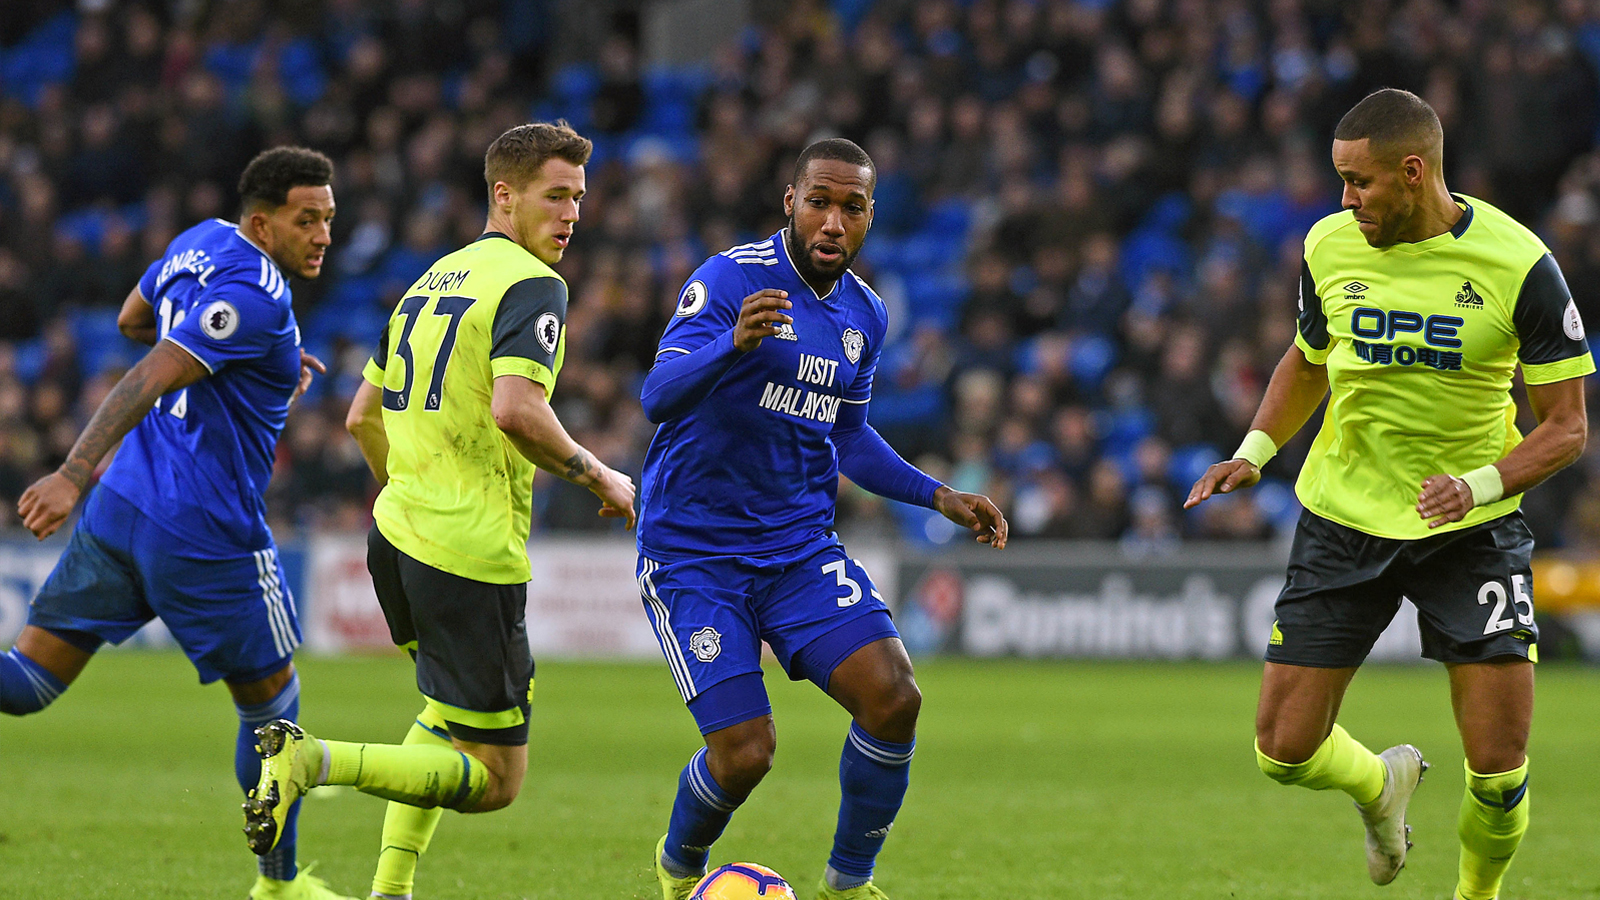 Watch Huddersfield Town vs Cardiff City Live Stream, How To Watch Championship Round 13 Live TV Info Worldwide